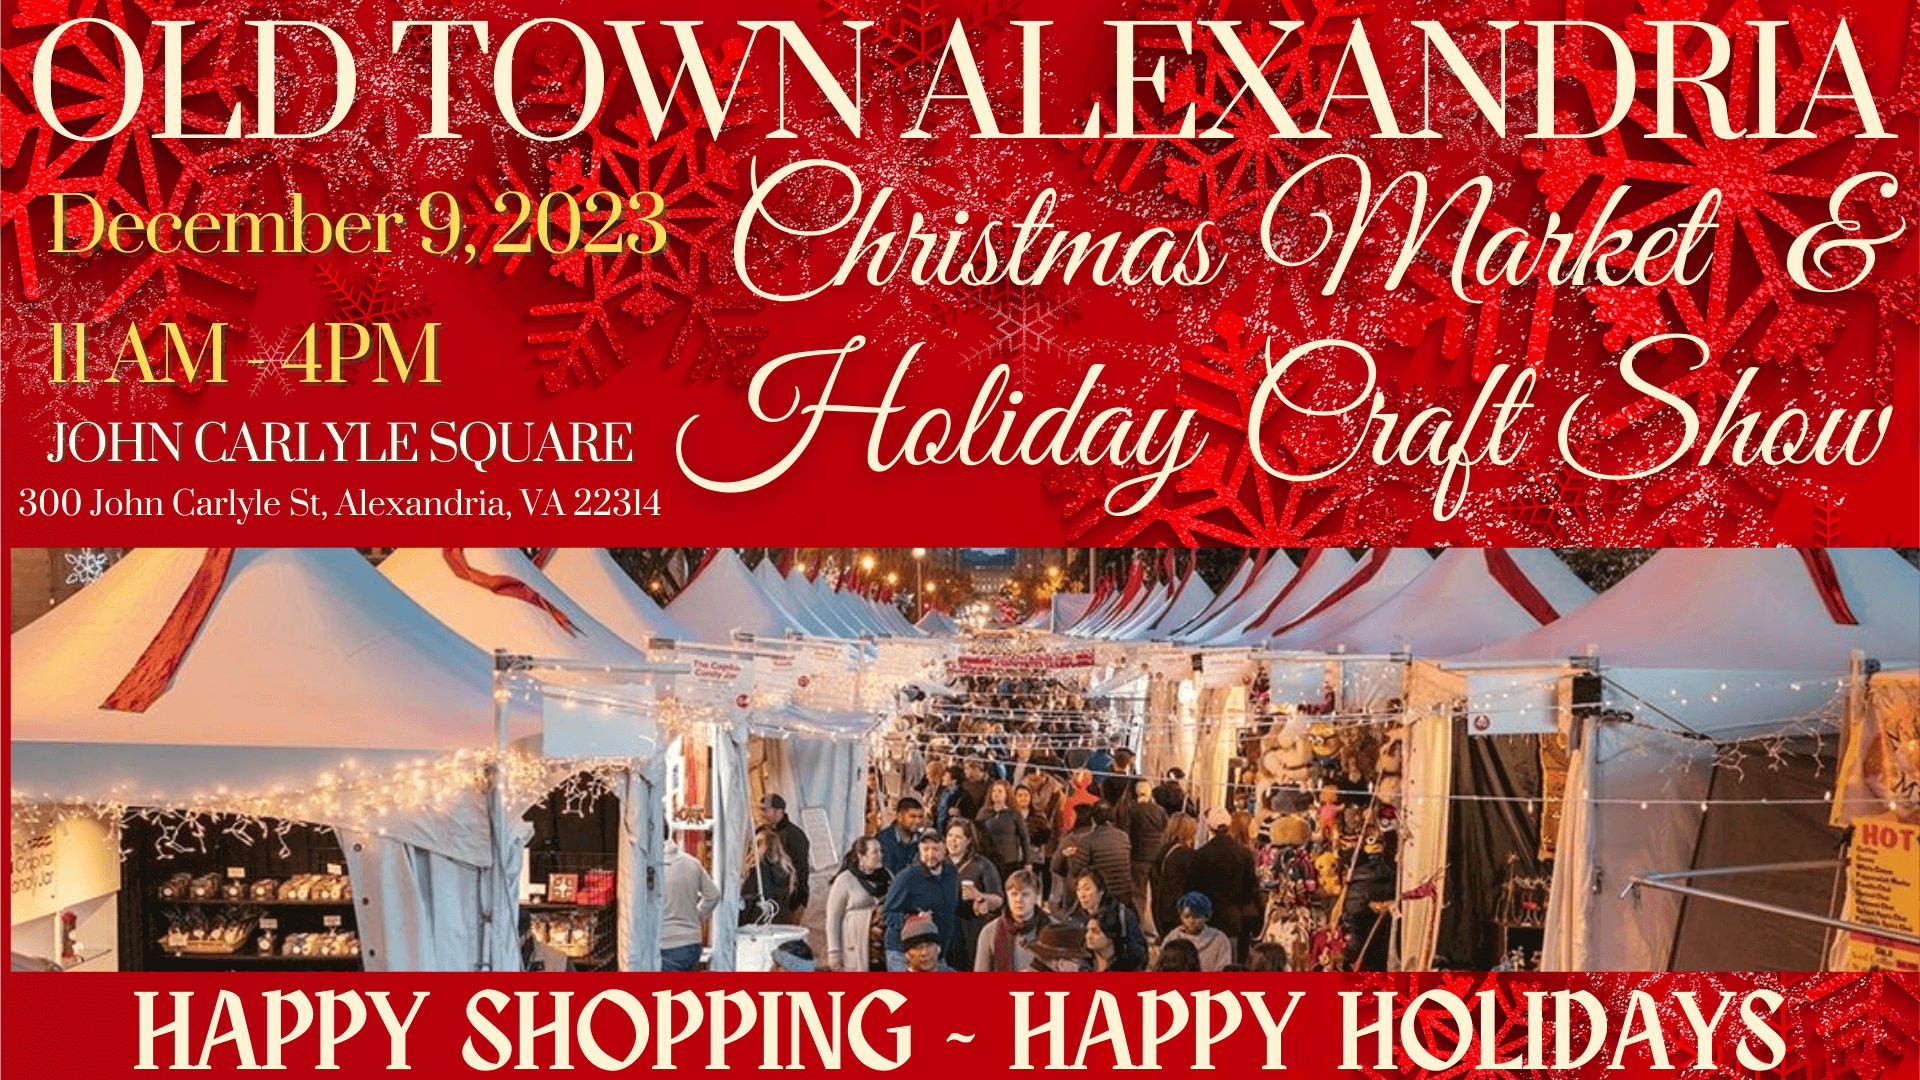 Old Town Alexandria Christmas Fair and Holiday Craft Show